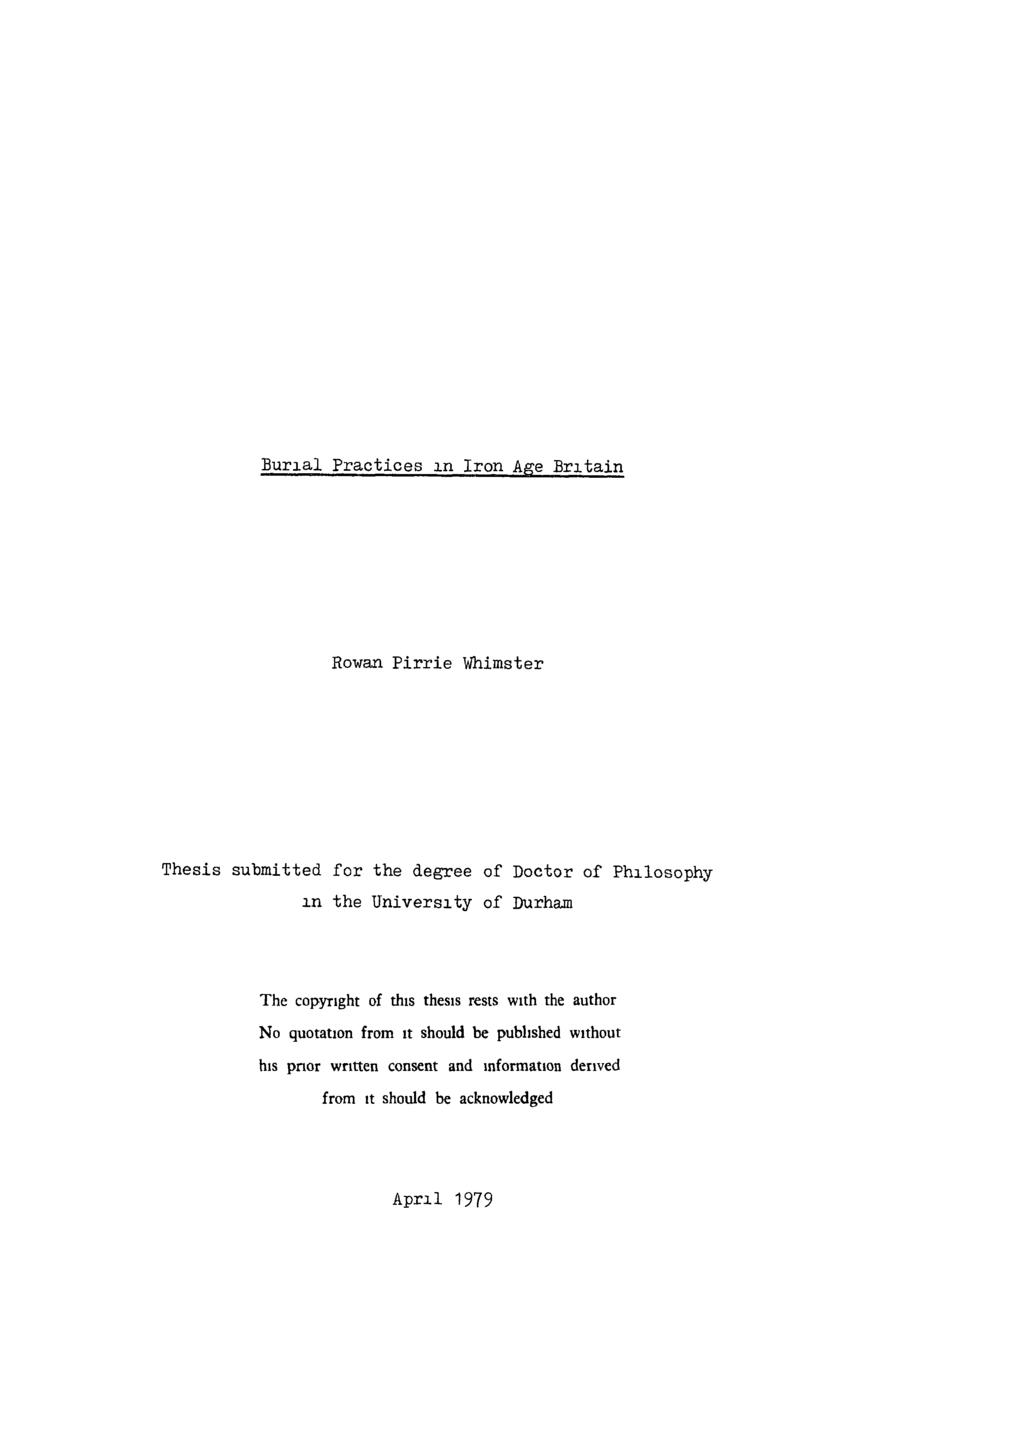 Burial Practices m Iron Age Britain Rowan Pirrie Whimster Thesis submitted for the degree of Doctor of Philosophy m the University of Durham The copyright of this